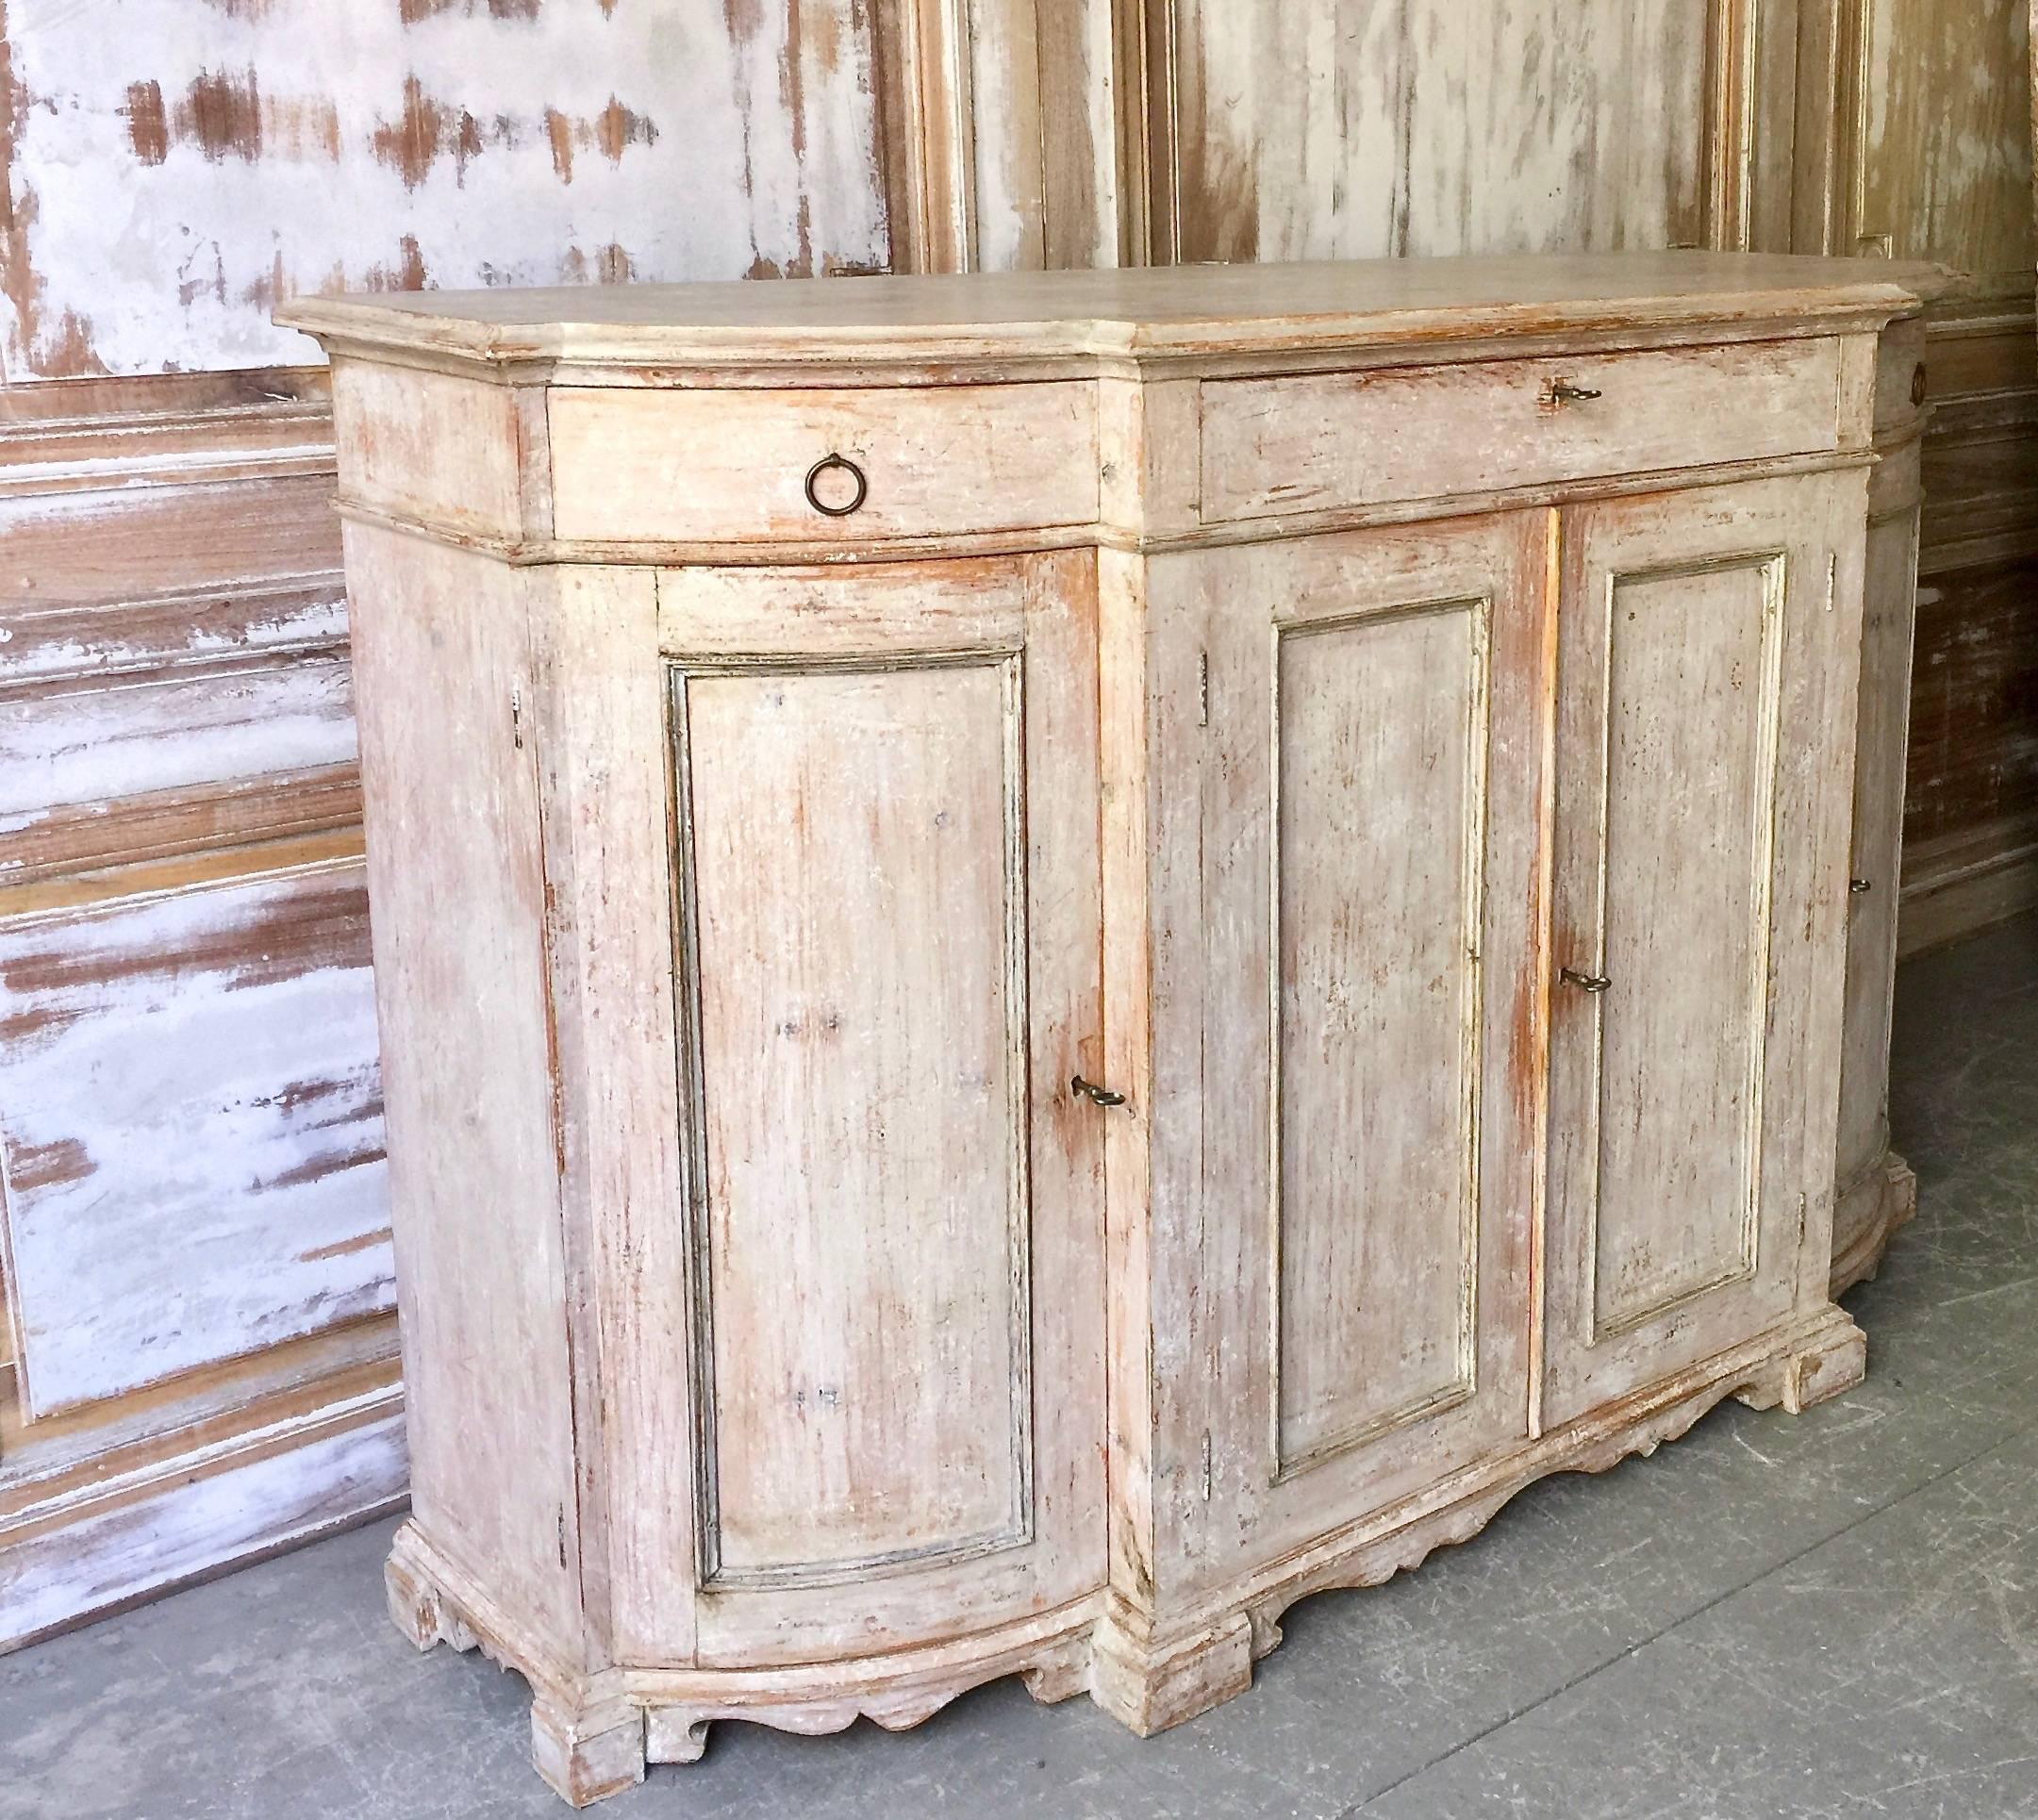 A rare four-door 19th century Swedish Gustavian sideboard with curved panelled doors at each corner and panelled central doors under the shaped top and three drawers on beautifully carved details on front and side skirt.
Stockholm, Sweden, circa